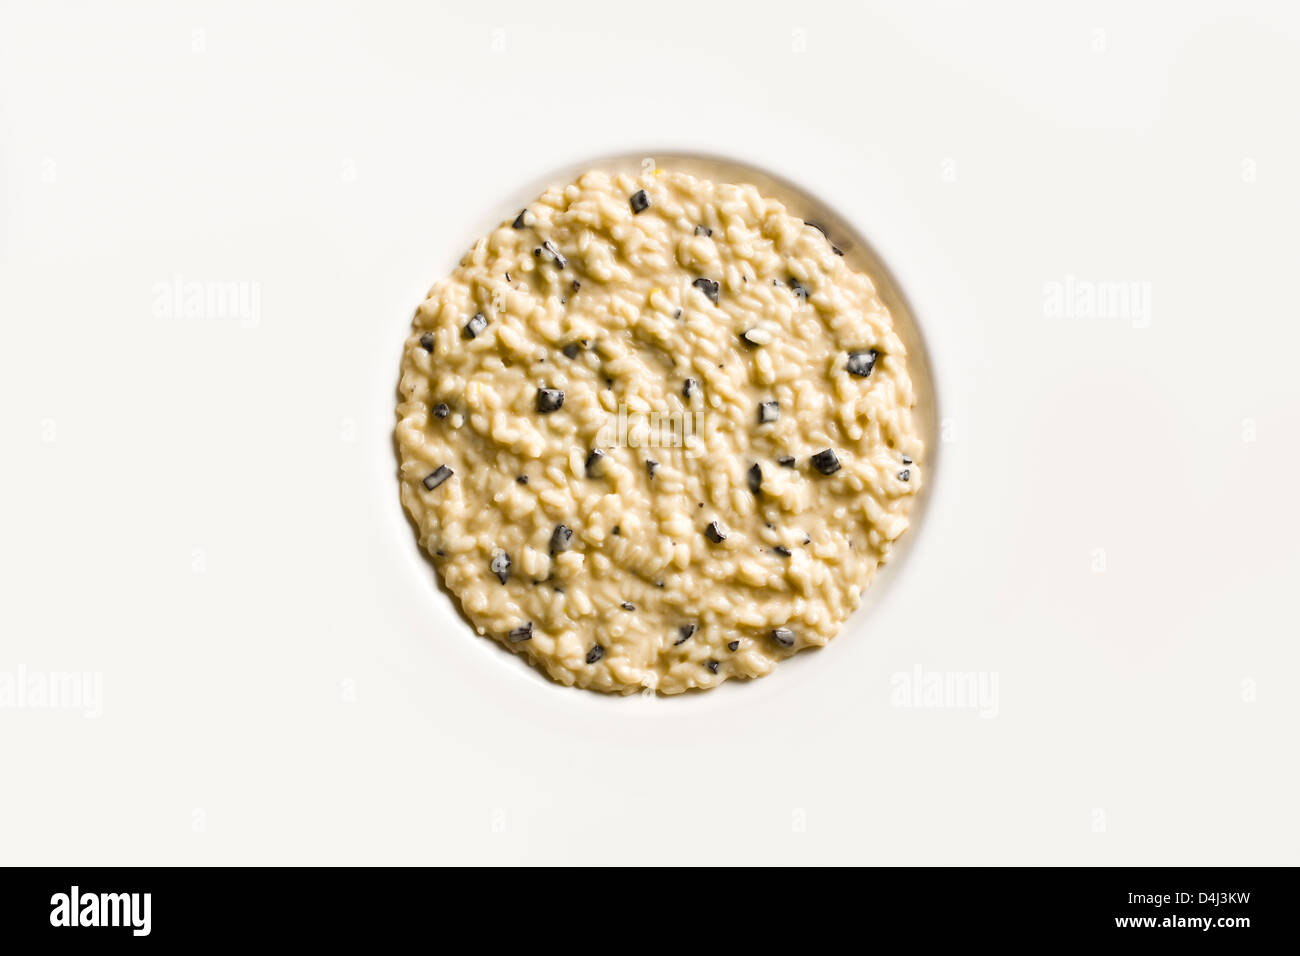 Risotto with Black Truffle on a white plate. Stock Photo